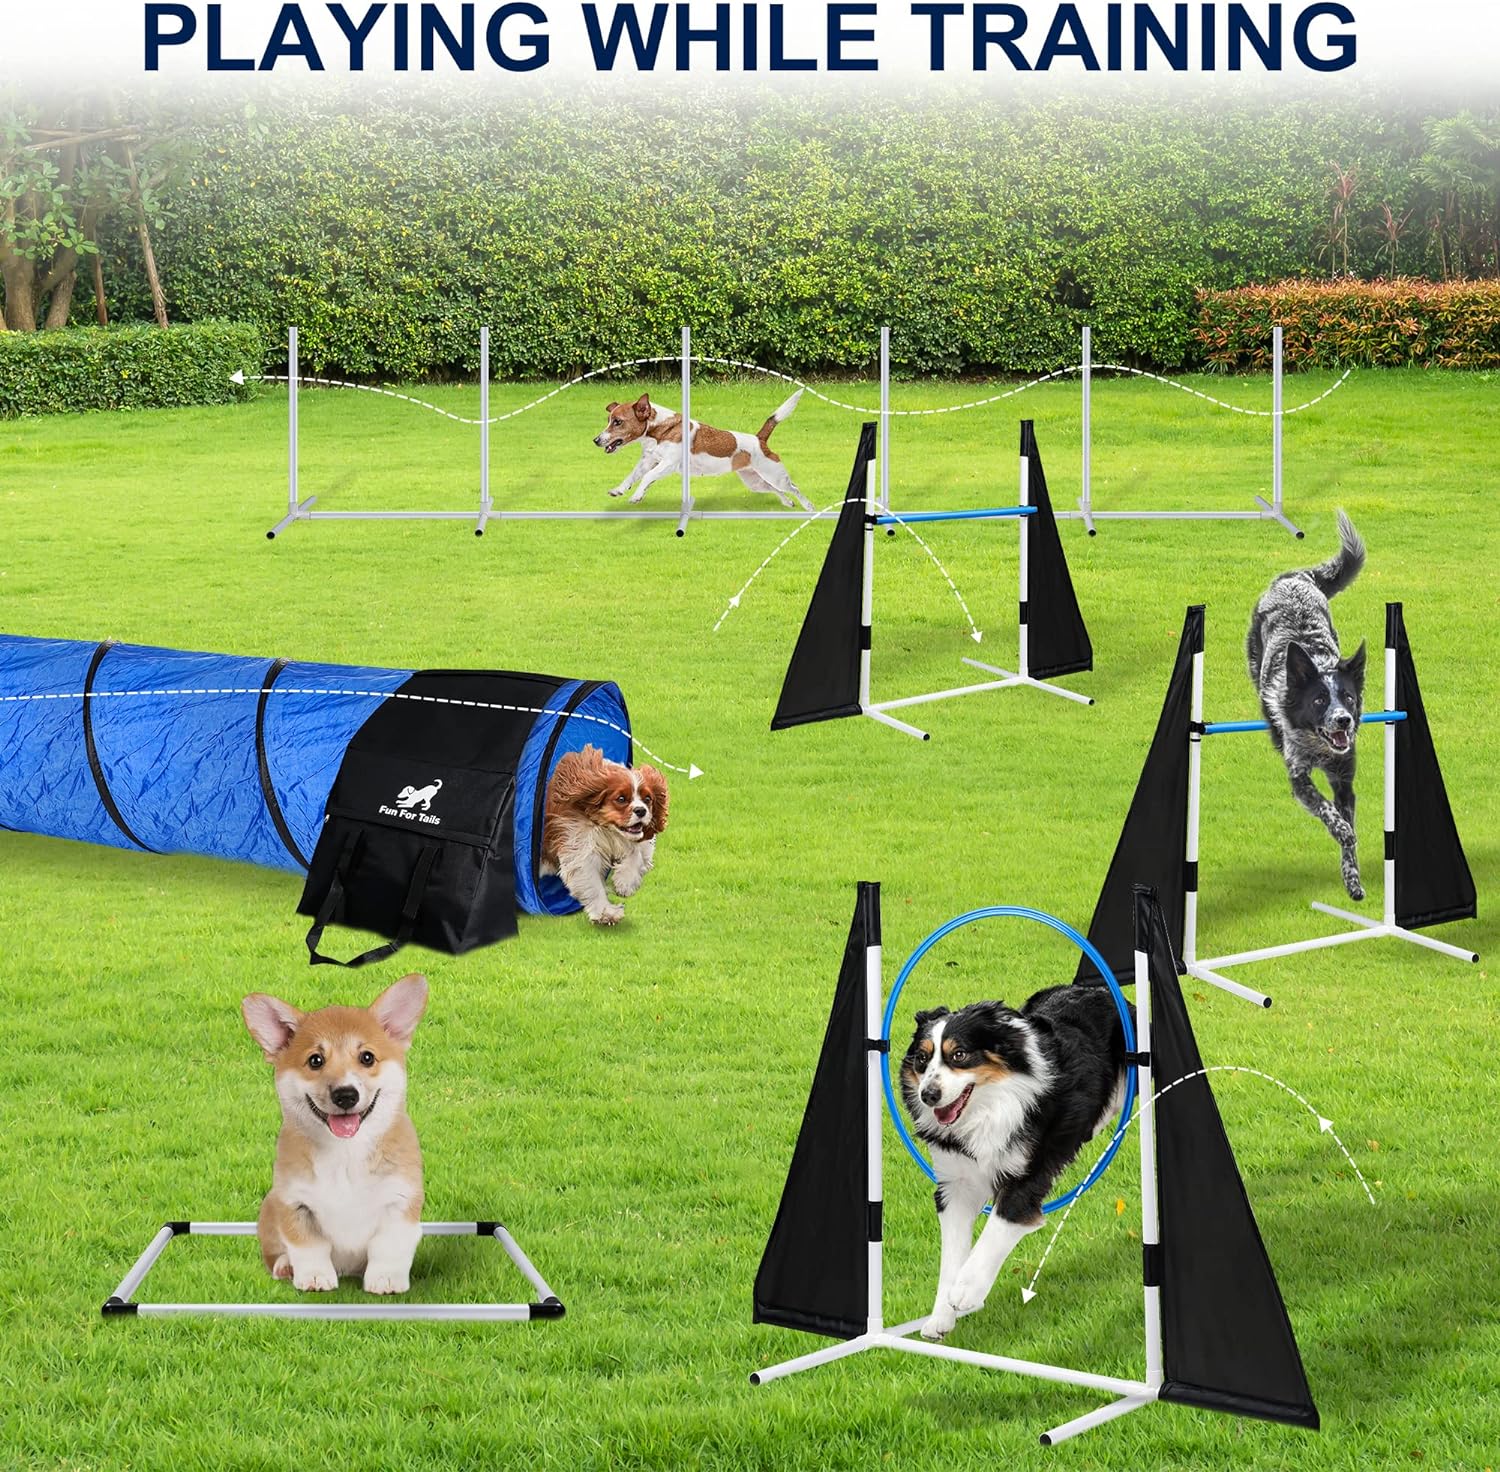 Fun For Tails Dog Agility Equipment Review